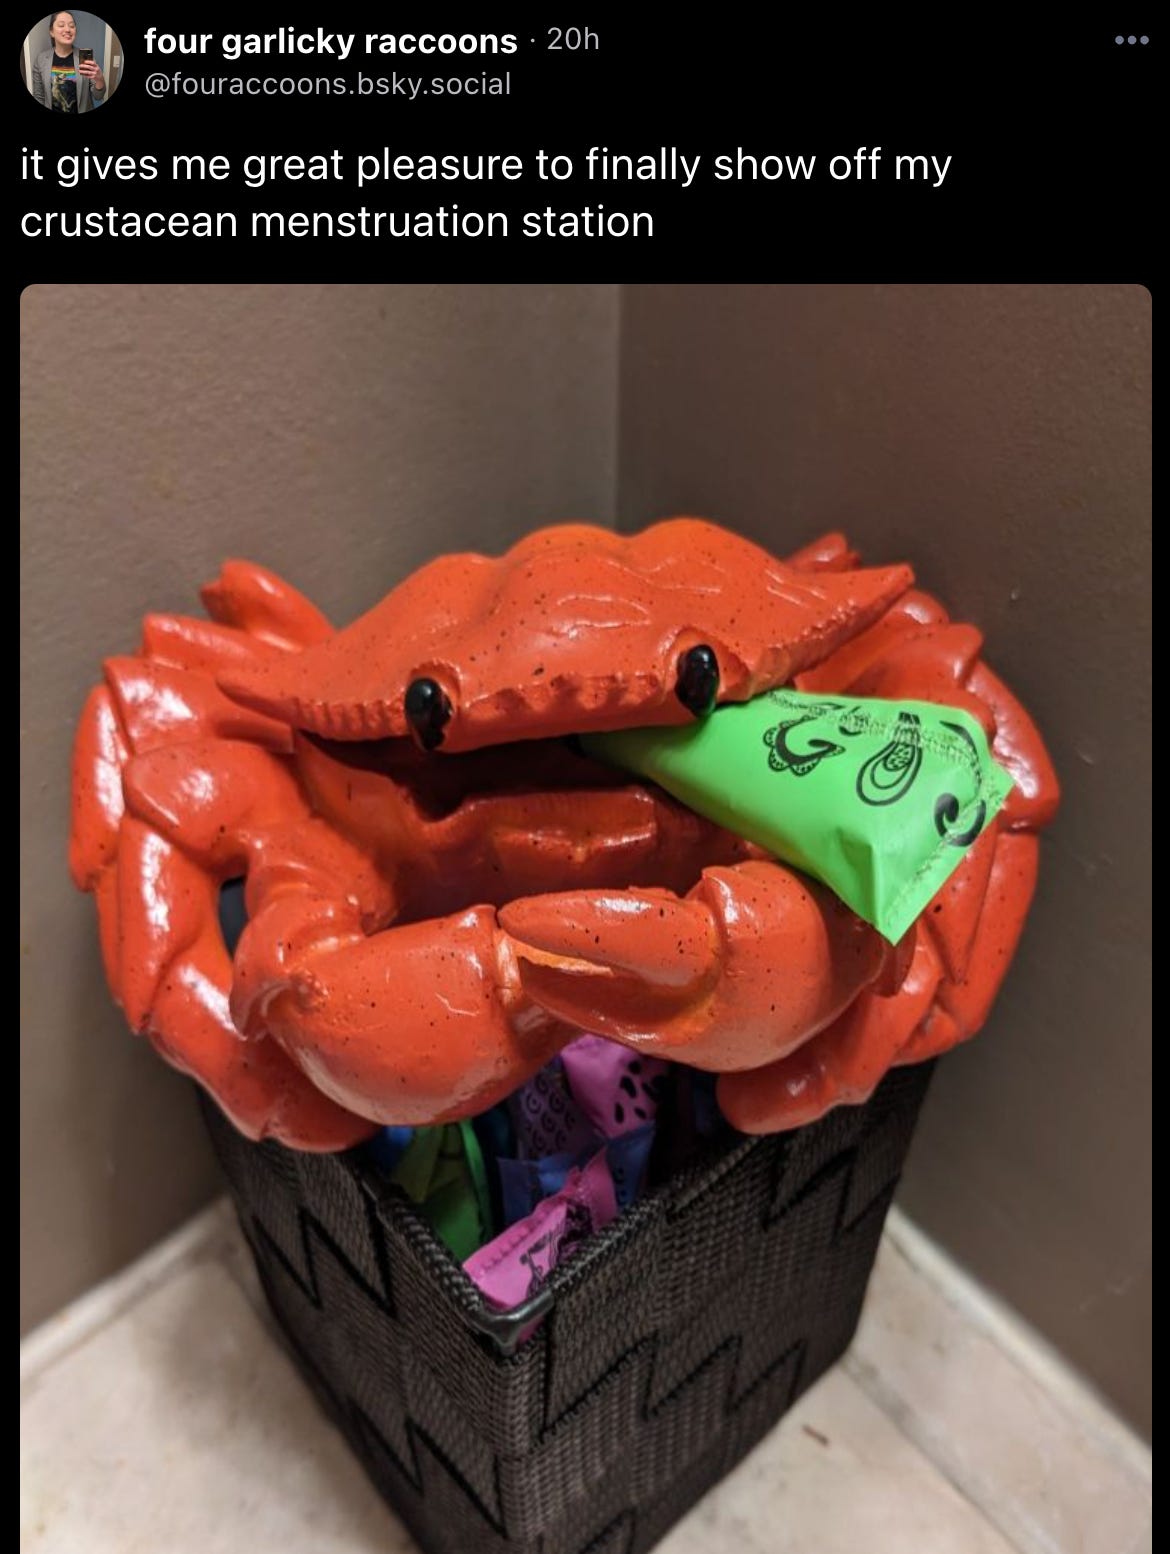 Skeet by fouraccoons: “it gives me great pleasure to finally show off my crustacean menstruation station” with an image described as: “A ceramic crab ashtray sits atop a bin of menstrual products on a bathroom counter. the crab has a tampon sticking out of its mouth like a cigarette”